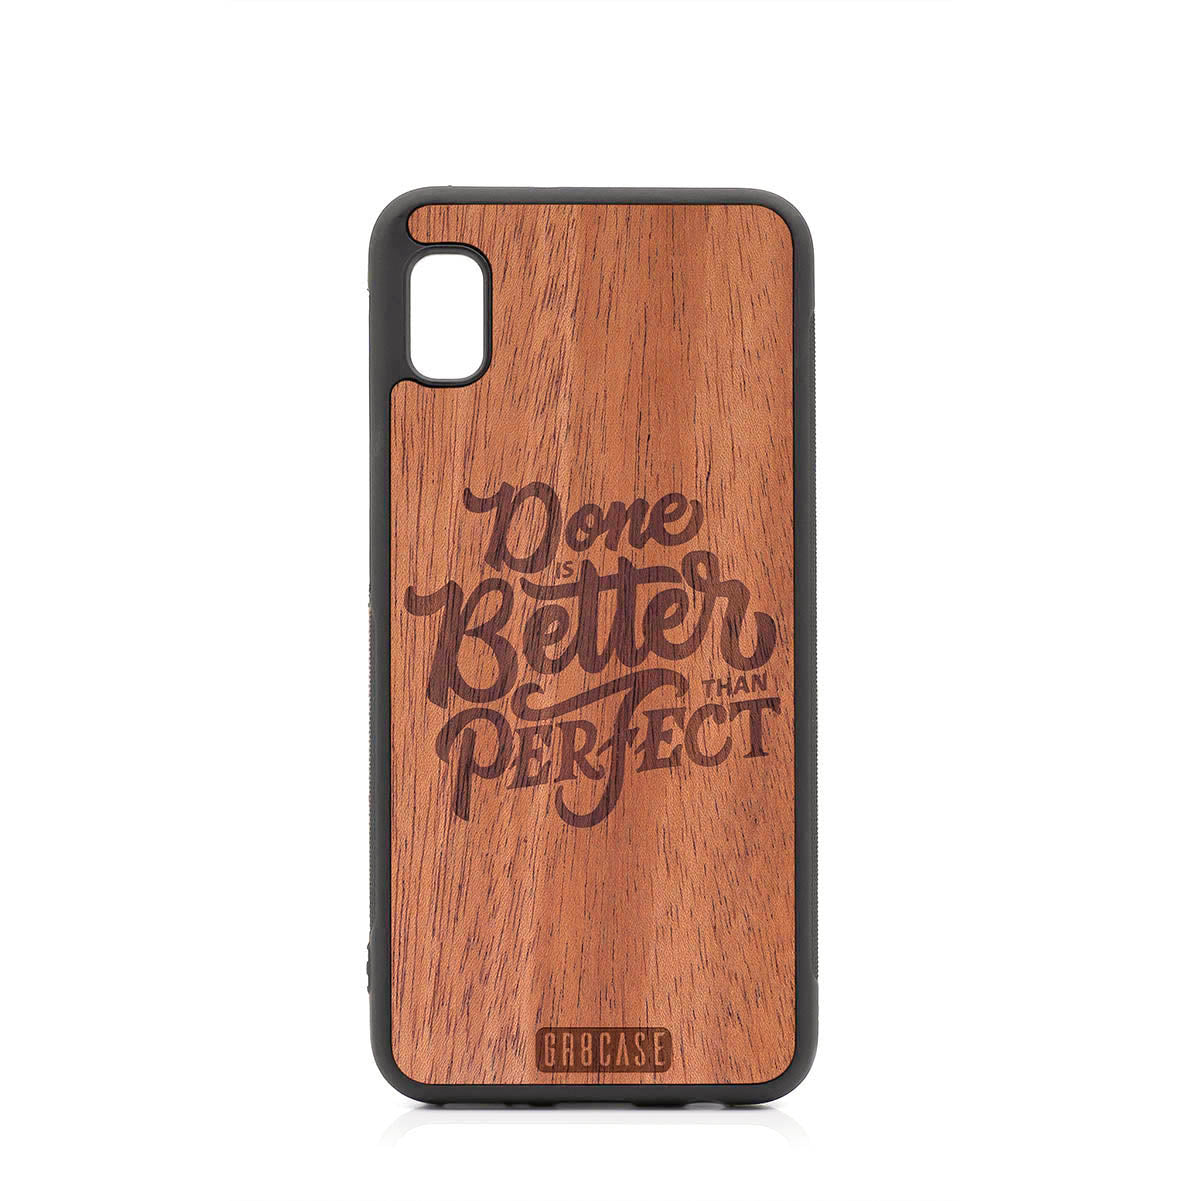 Done Is Better Than Perfect Design Wood Case For Samsung Galaxy A10E by GR8CASE